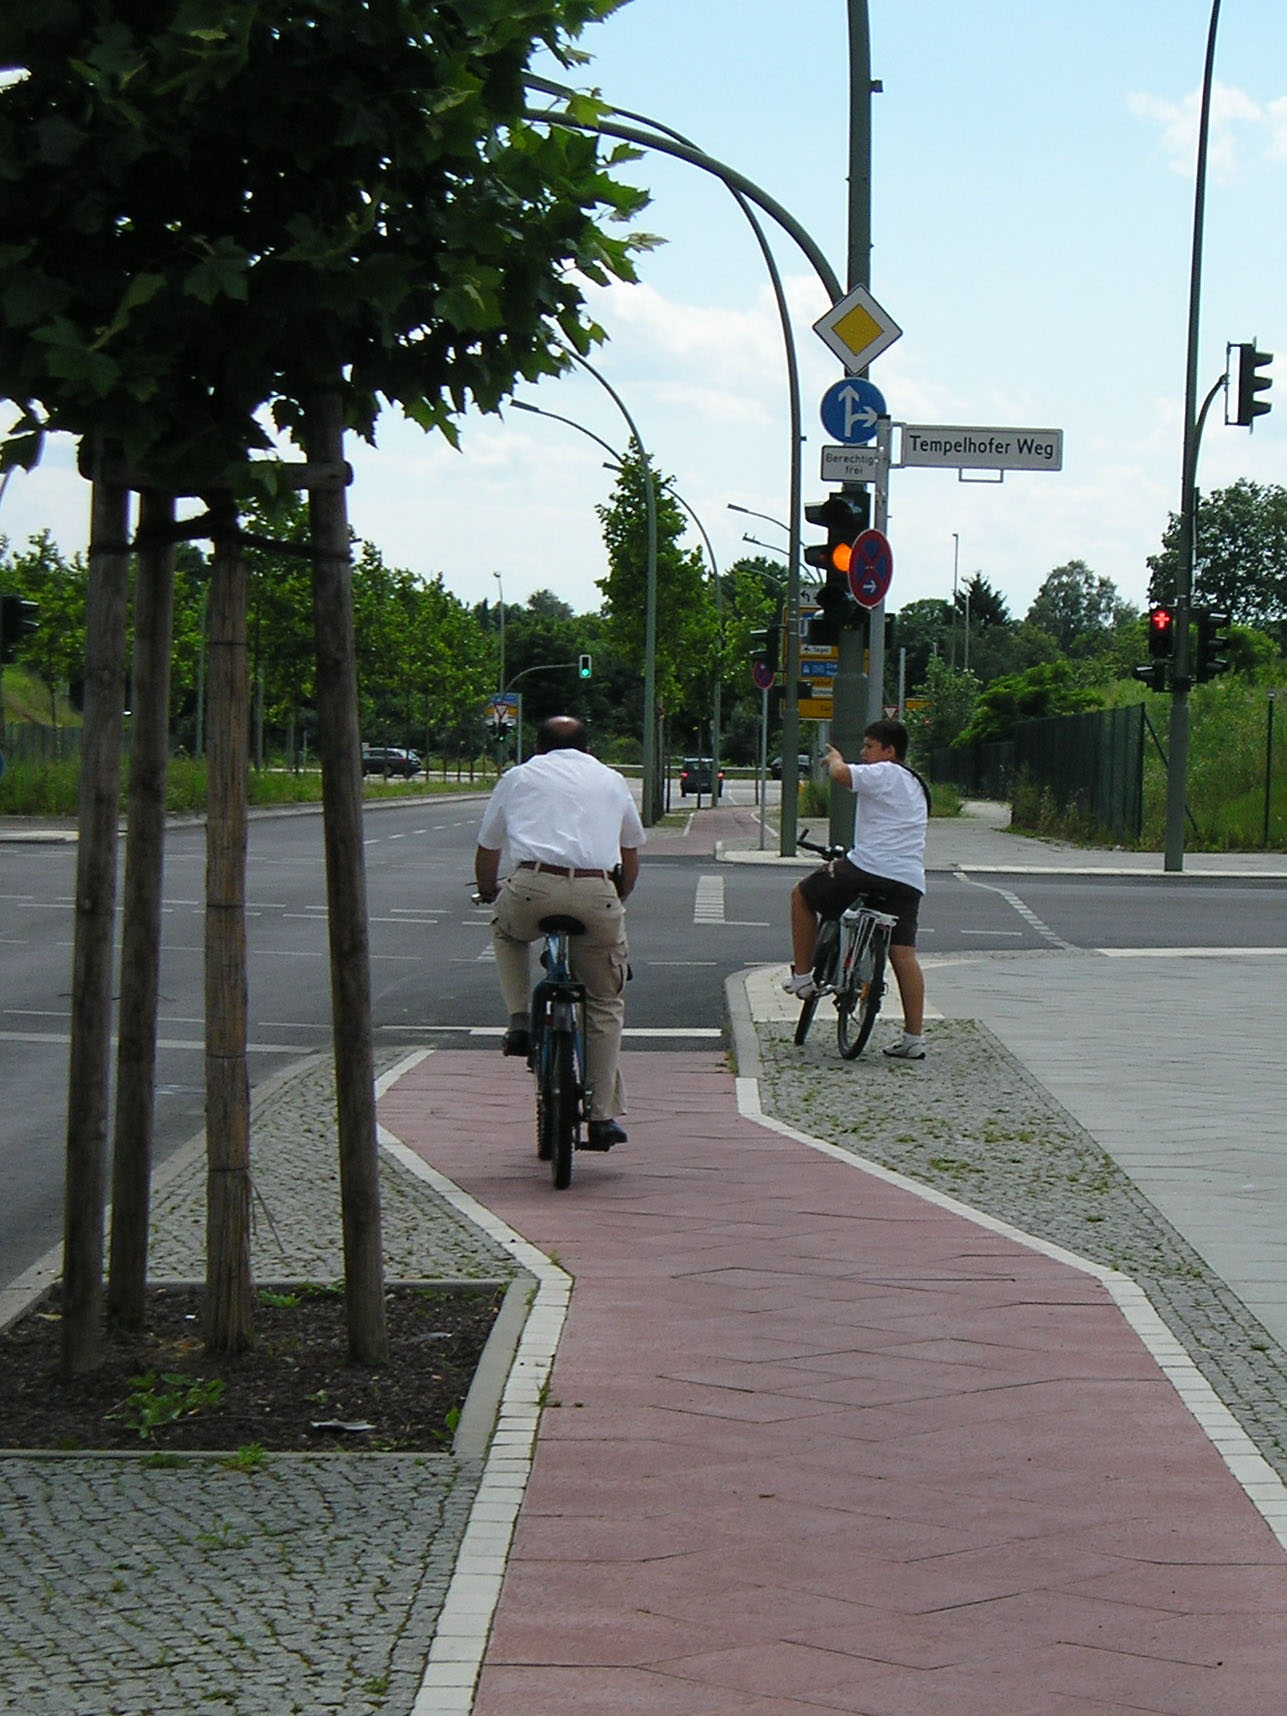 Fig. 31.20 A bike lane in Berlin curves to the edge of the roadway so that drivers and cyclists may interact more effectively at the intersection.